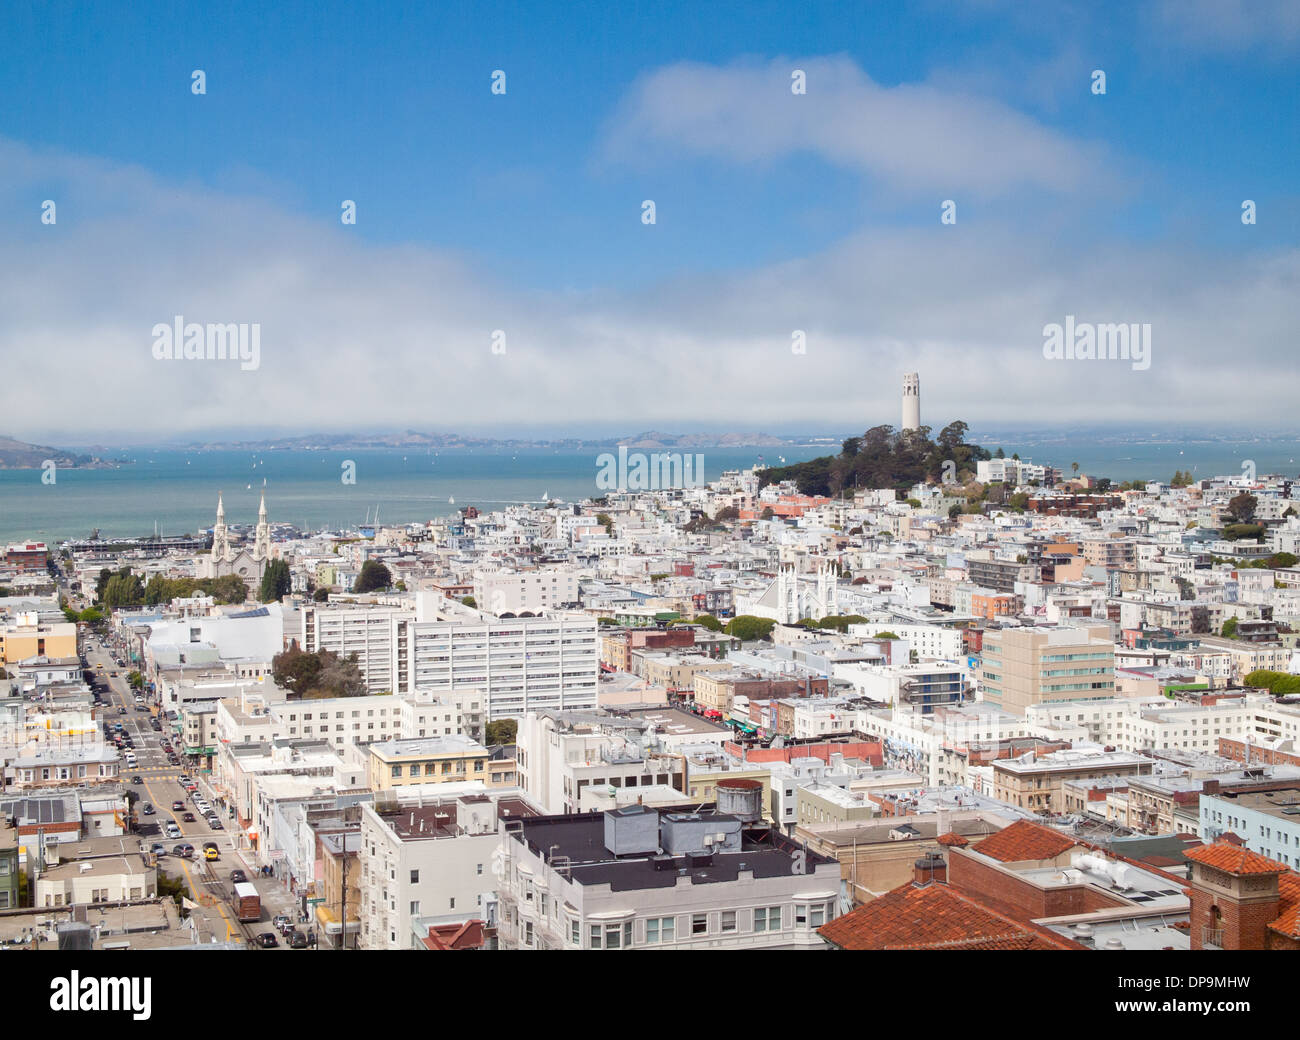 An aerial view of Coit Tower and the North Beach neighborhood of San Francisco, California. Stock Photo